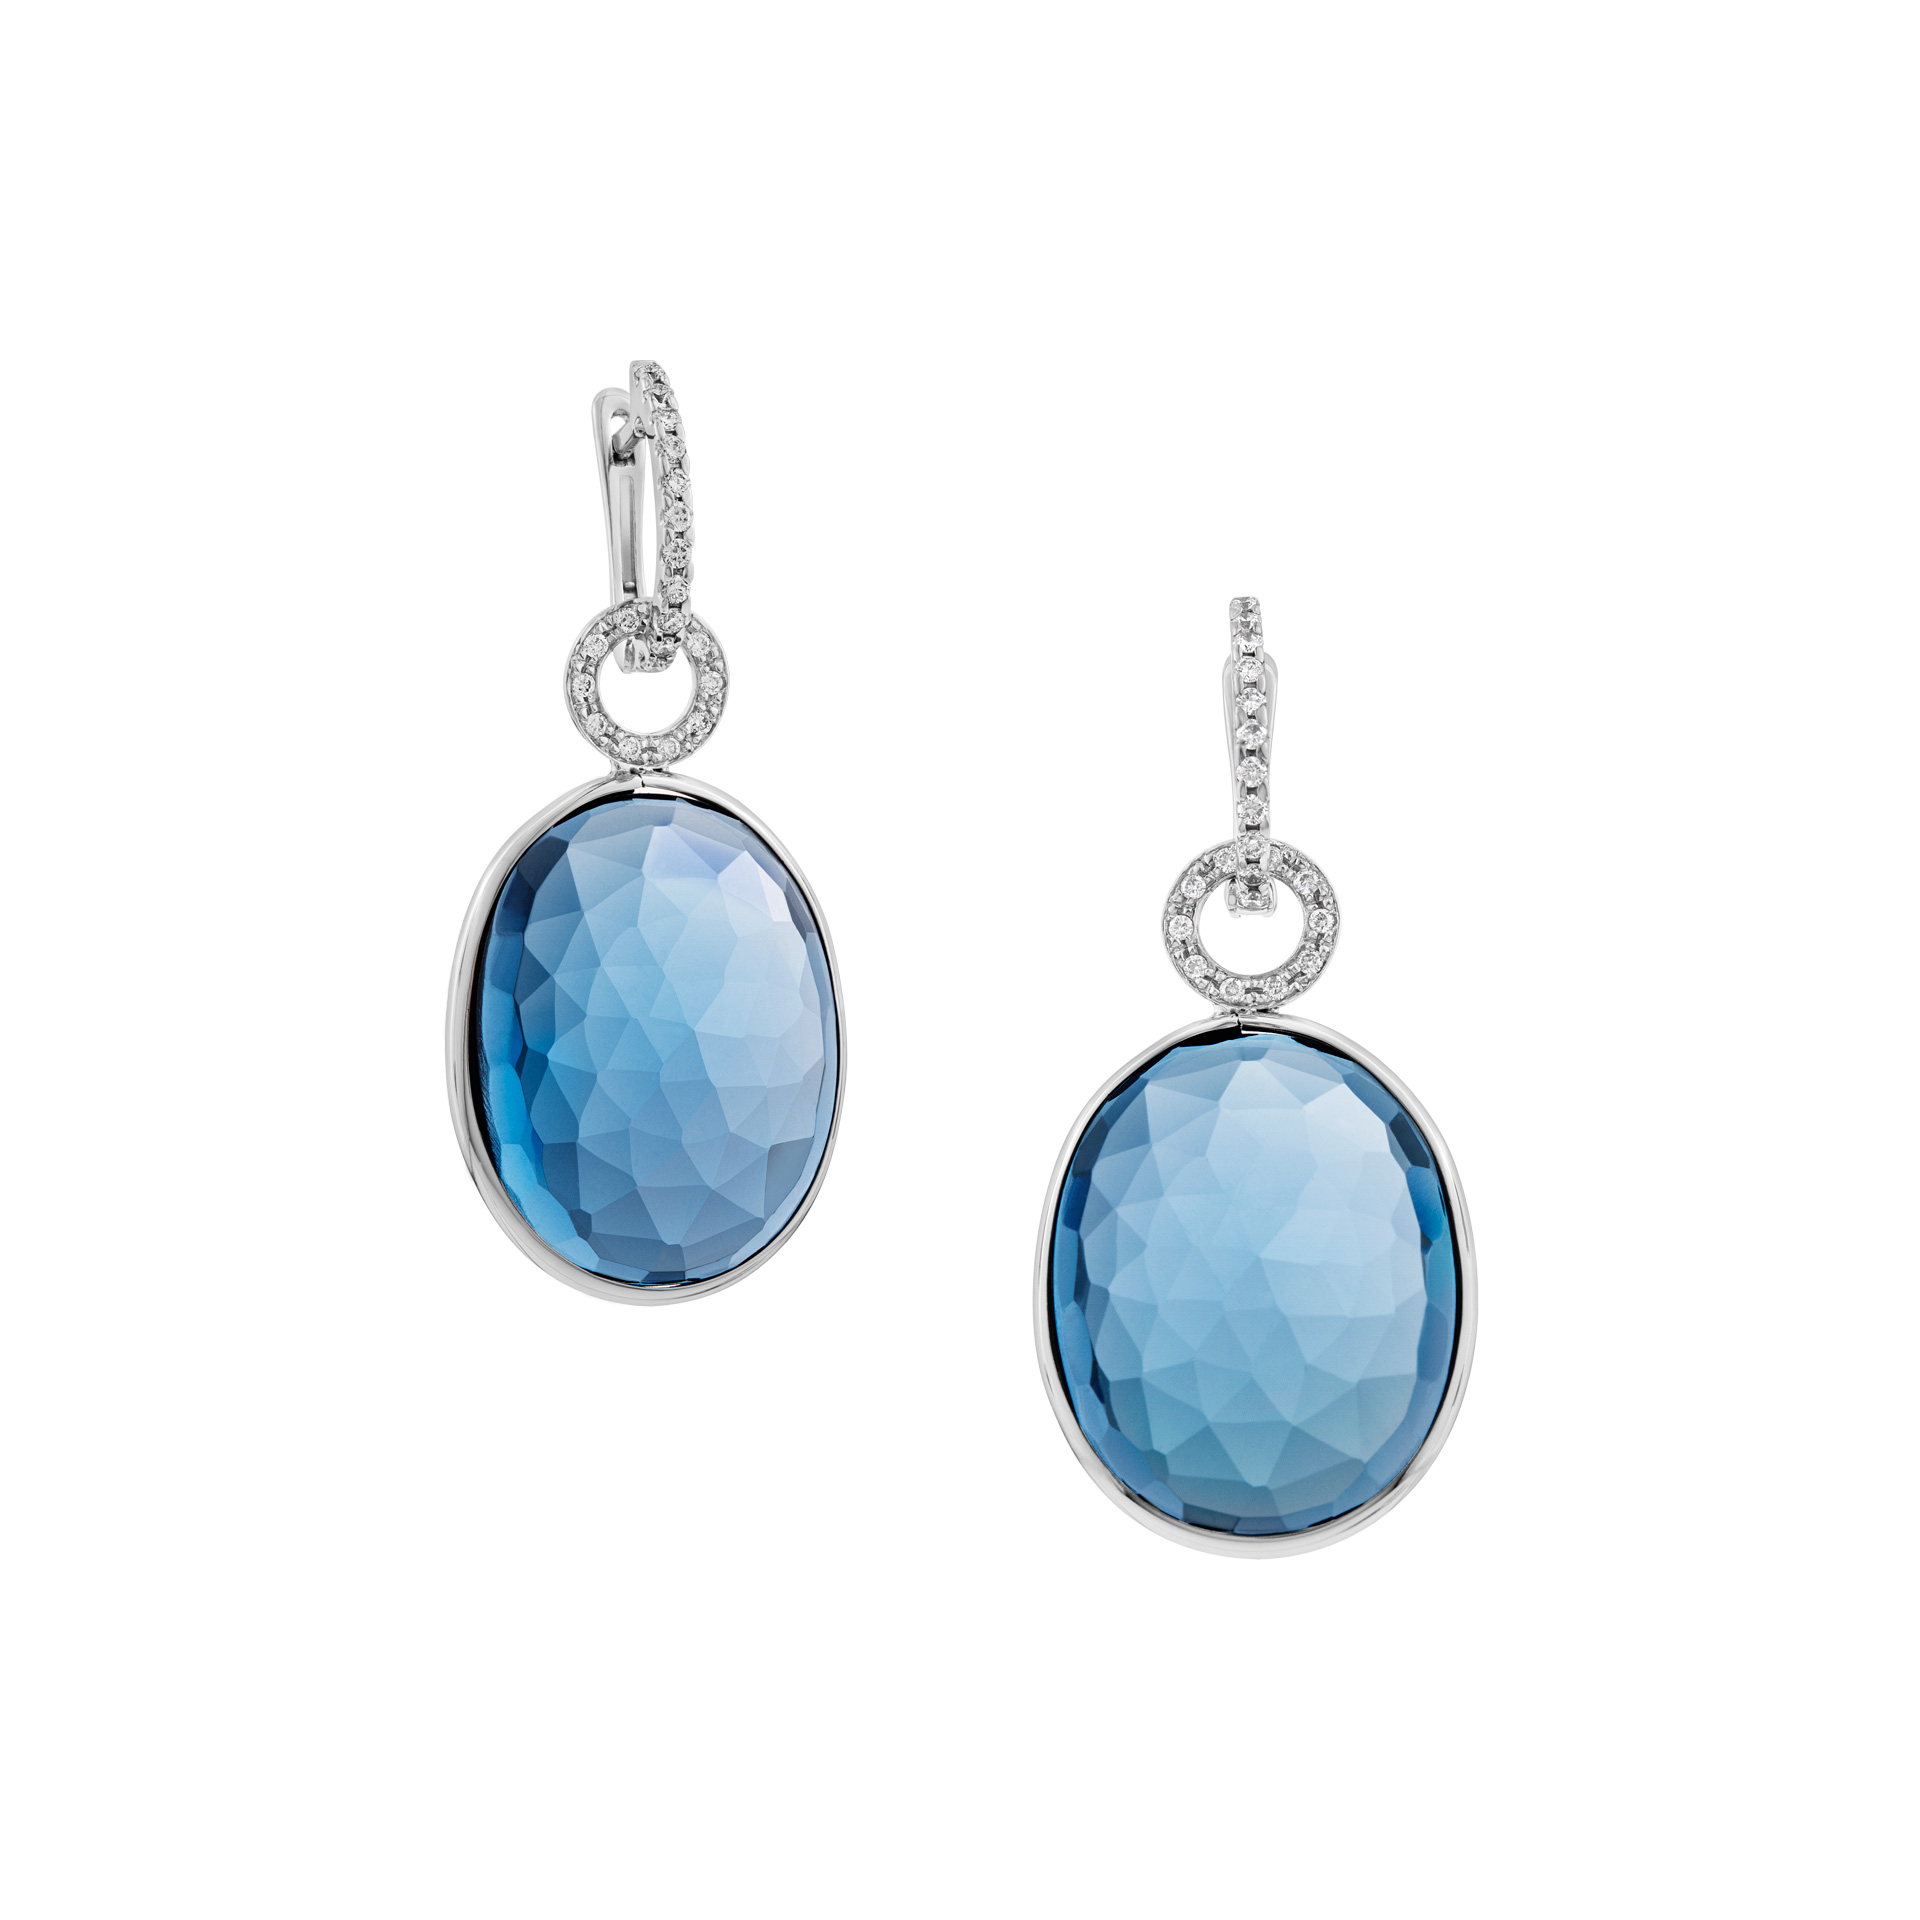 London Blue Topaz earrings in 18K white gold with diamond accents